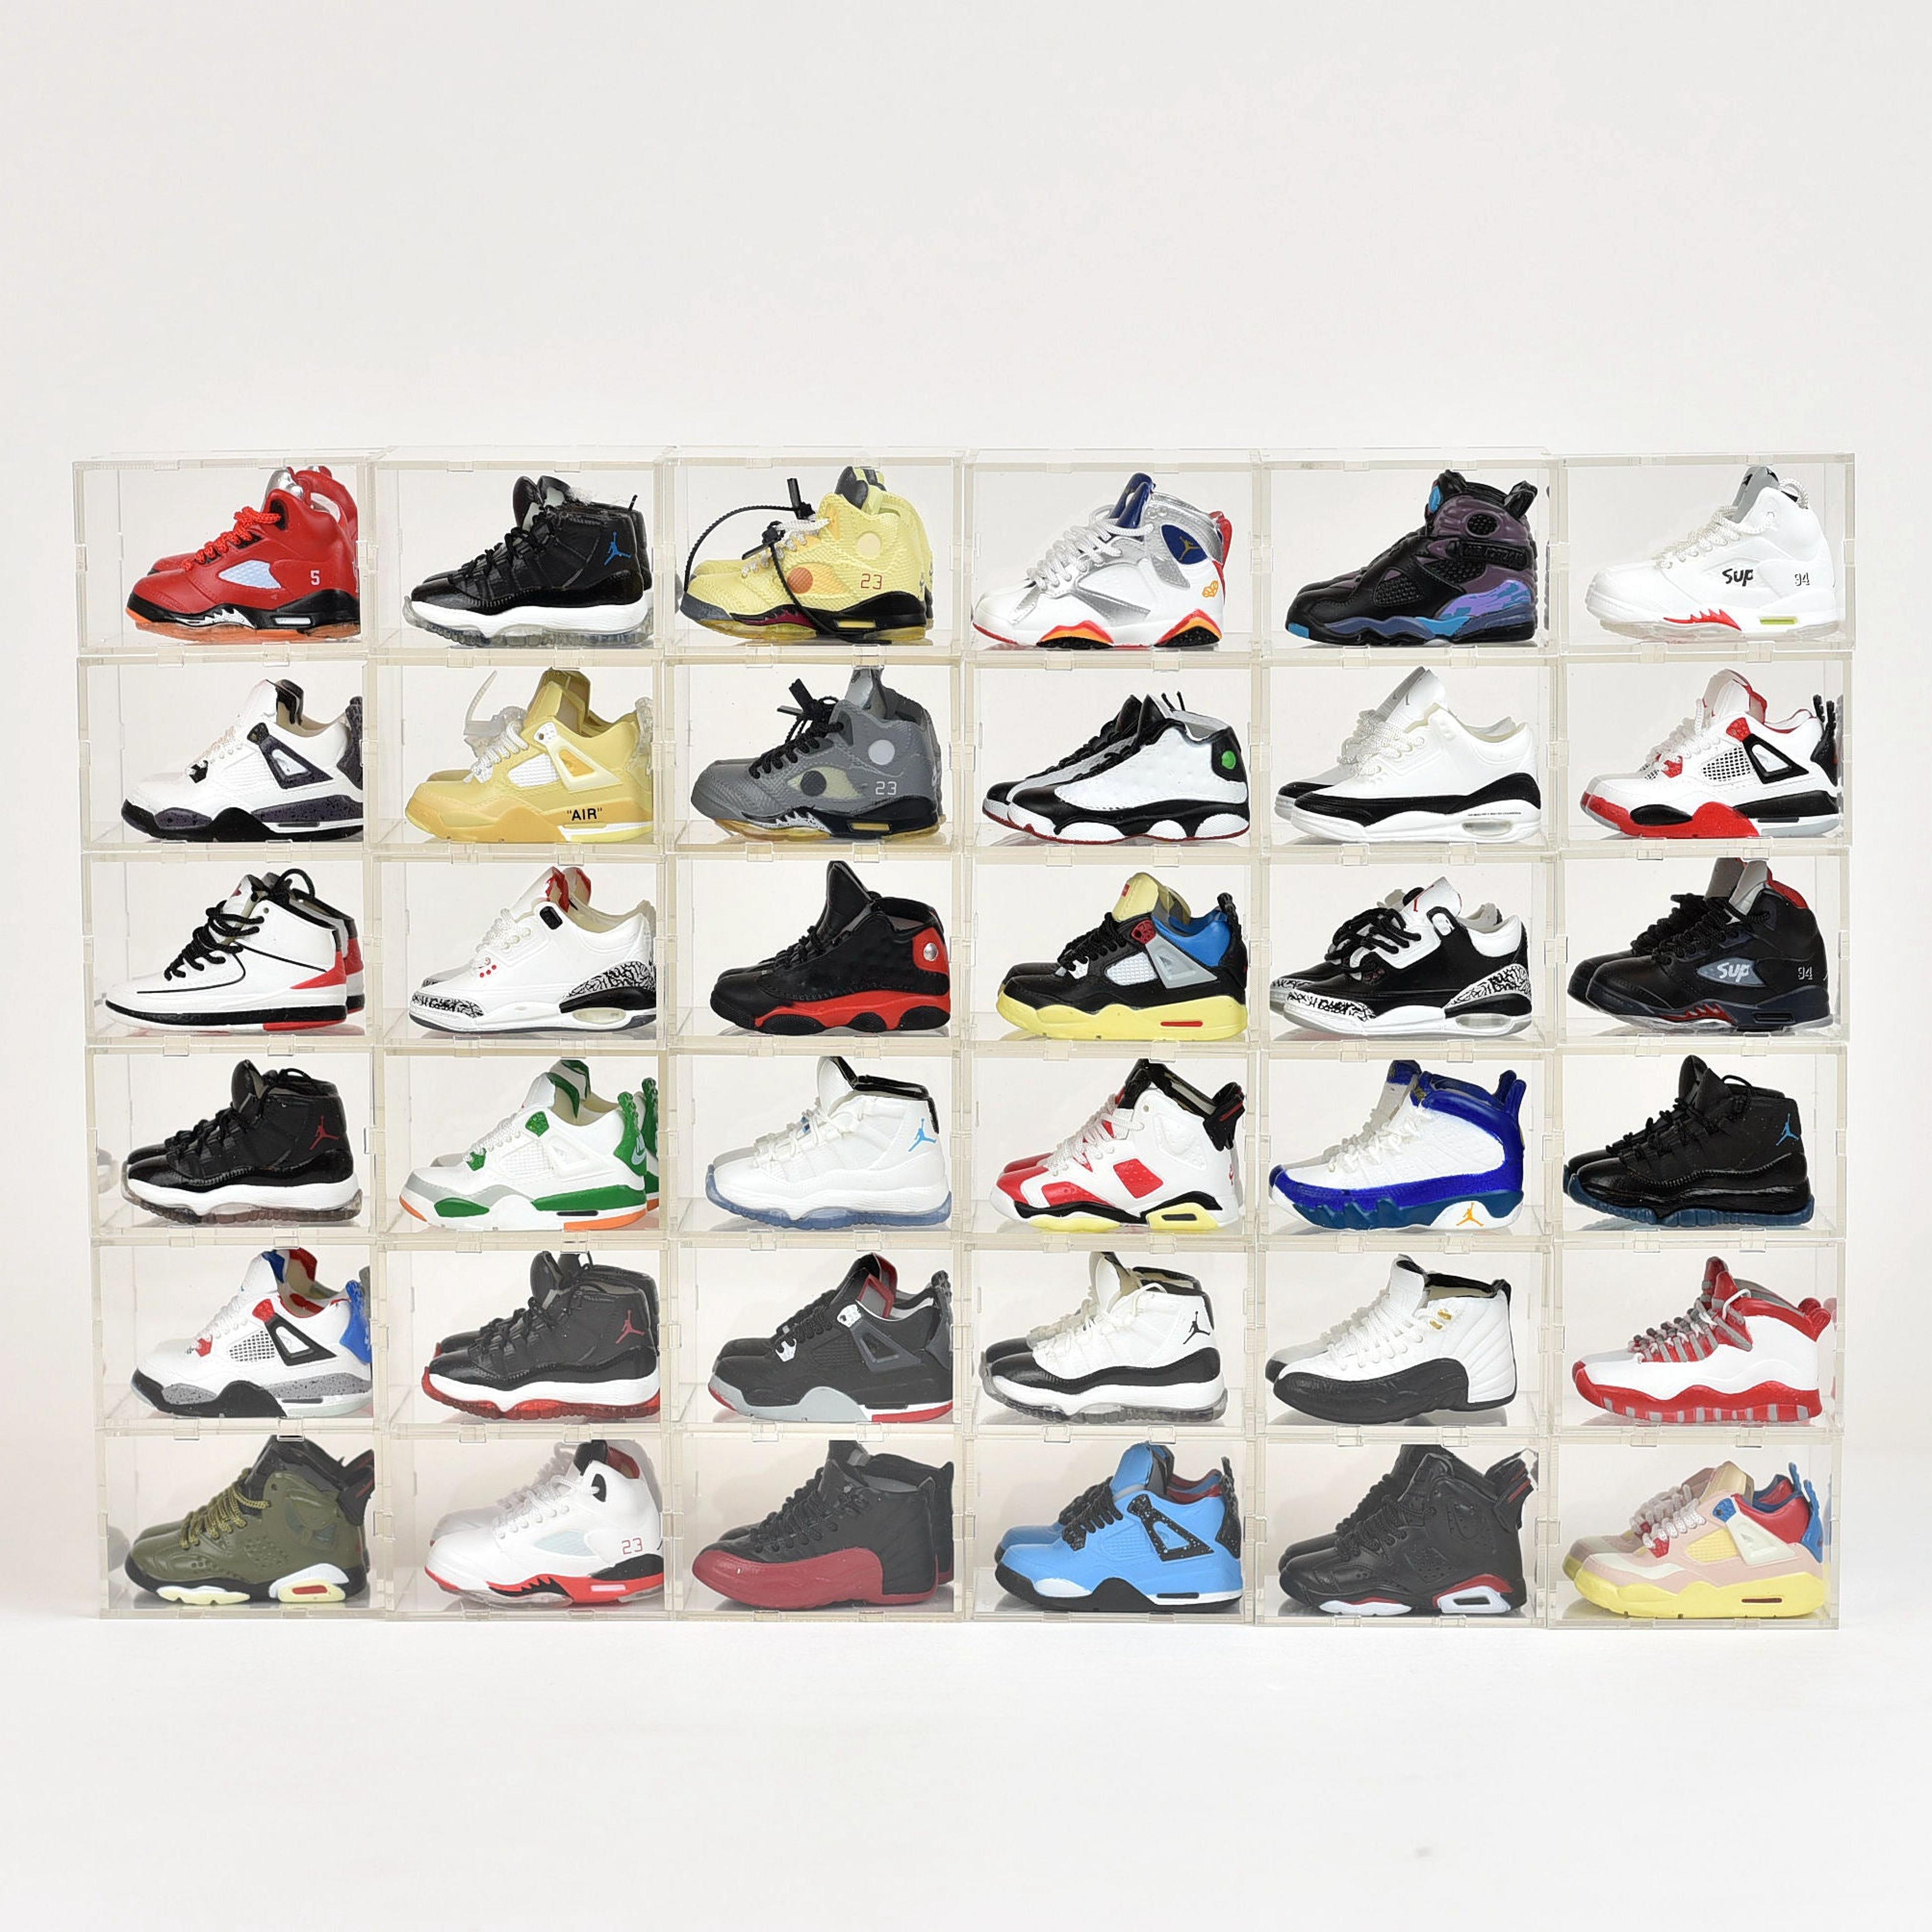 AJ2-AJ13 Mini Sneakers Collection with Display Case